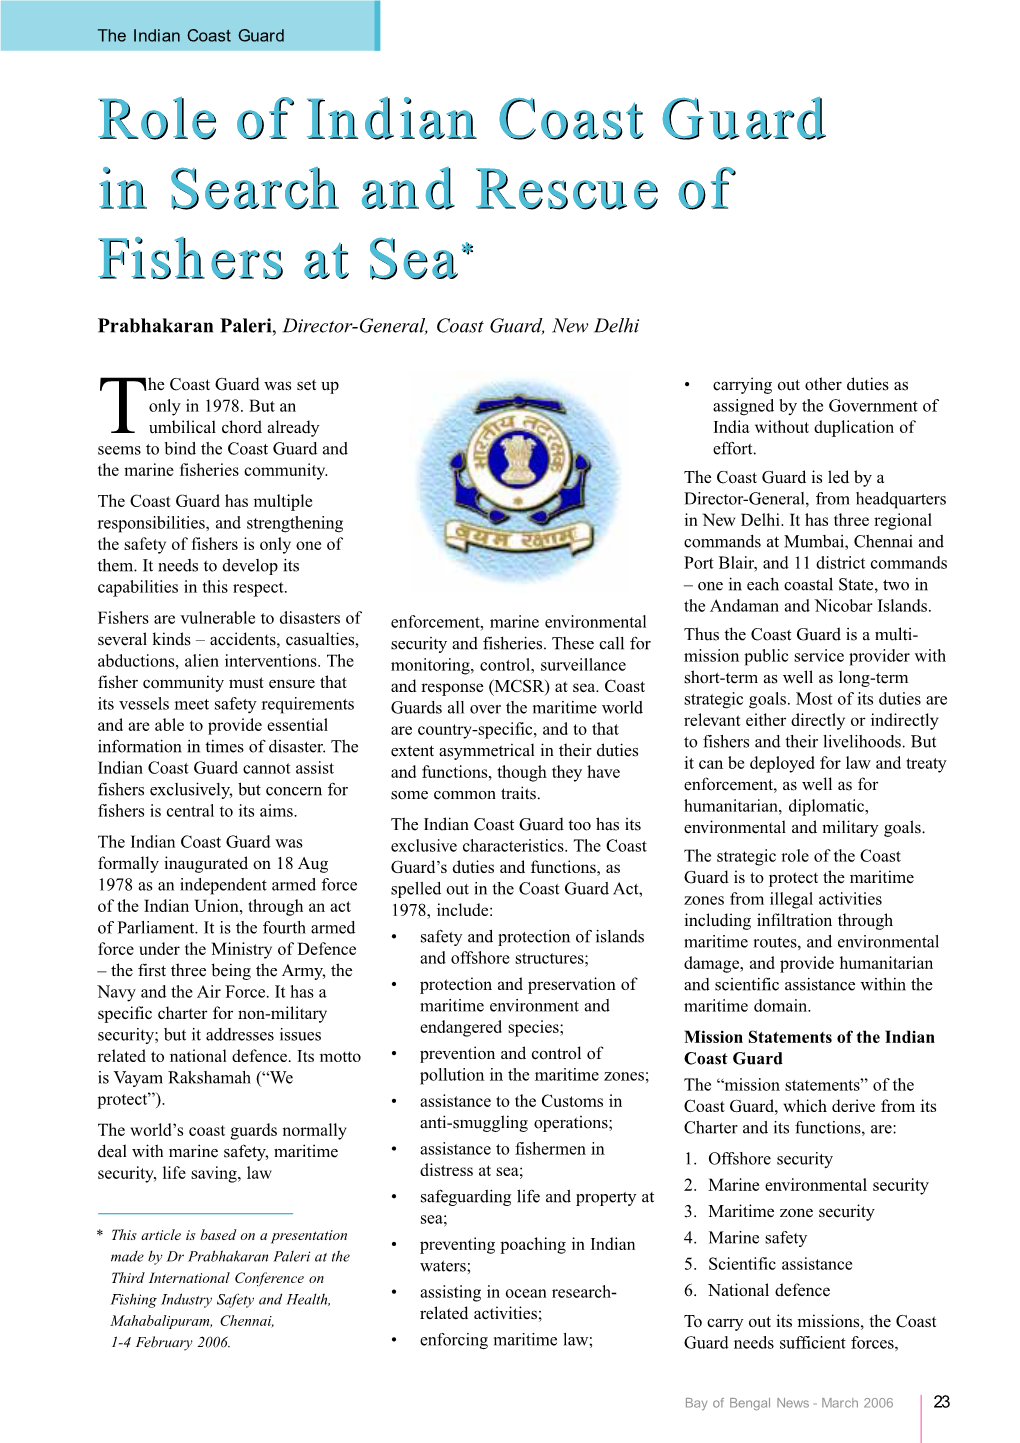 Role of Indian Coast Guard in Search and Rescue of Fishers at Sea*